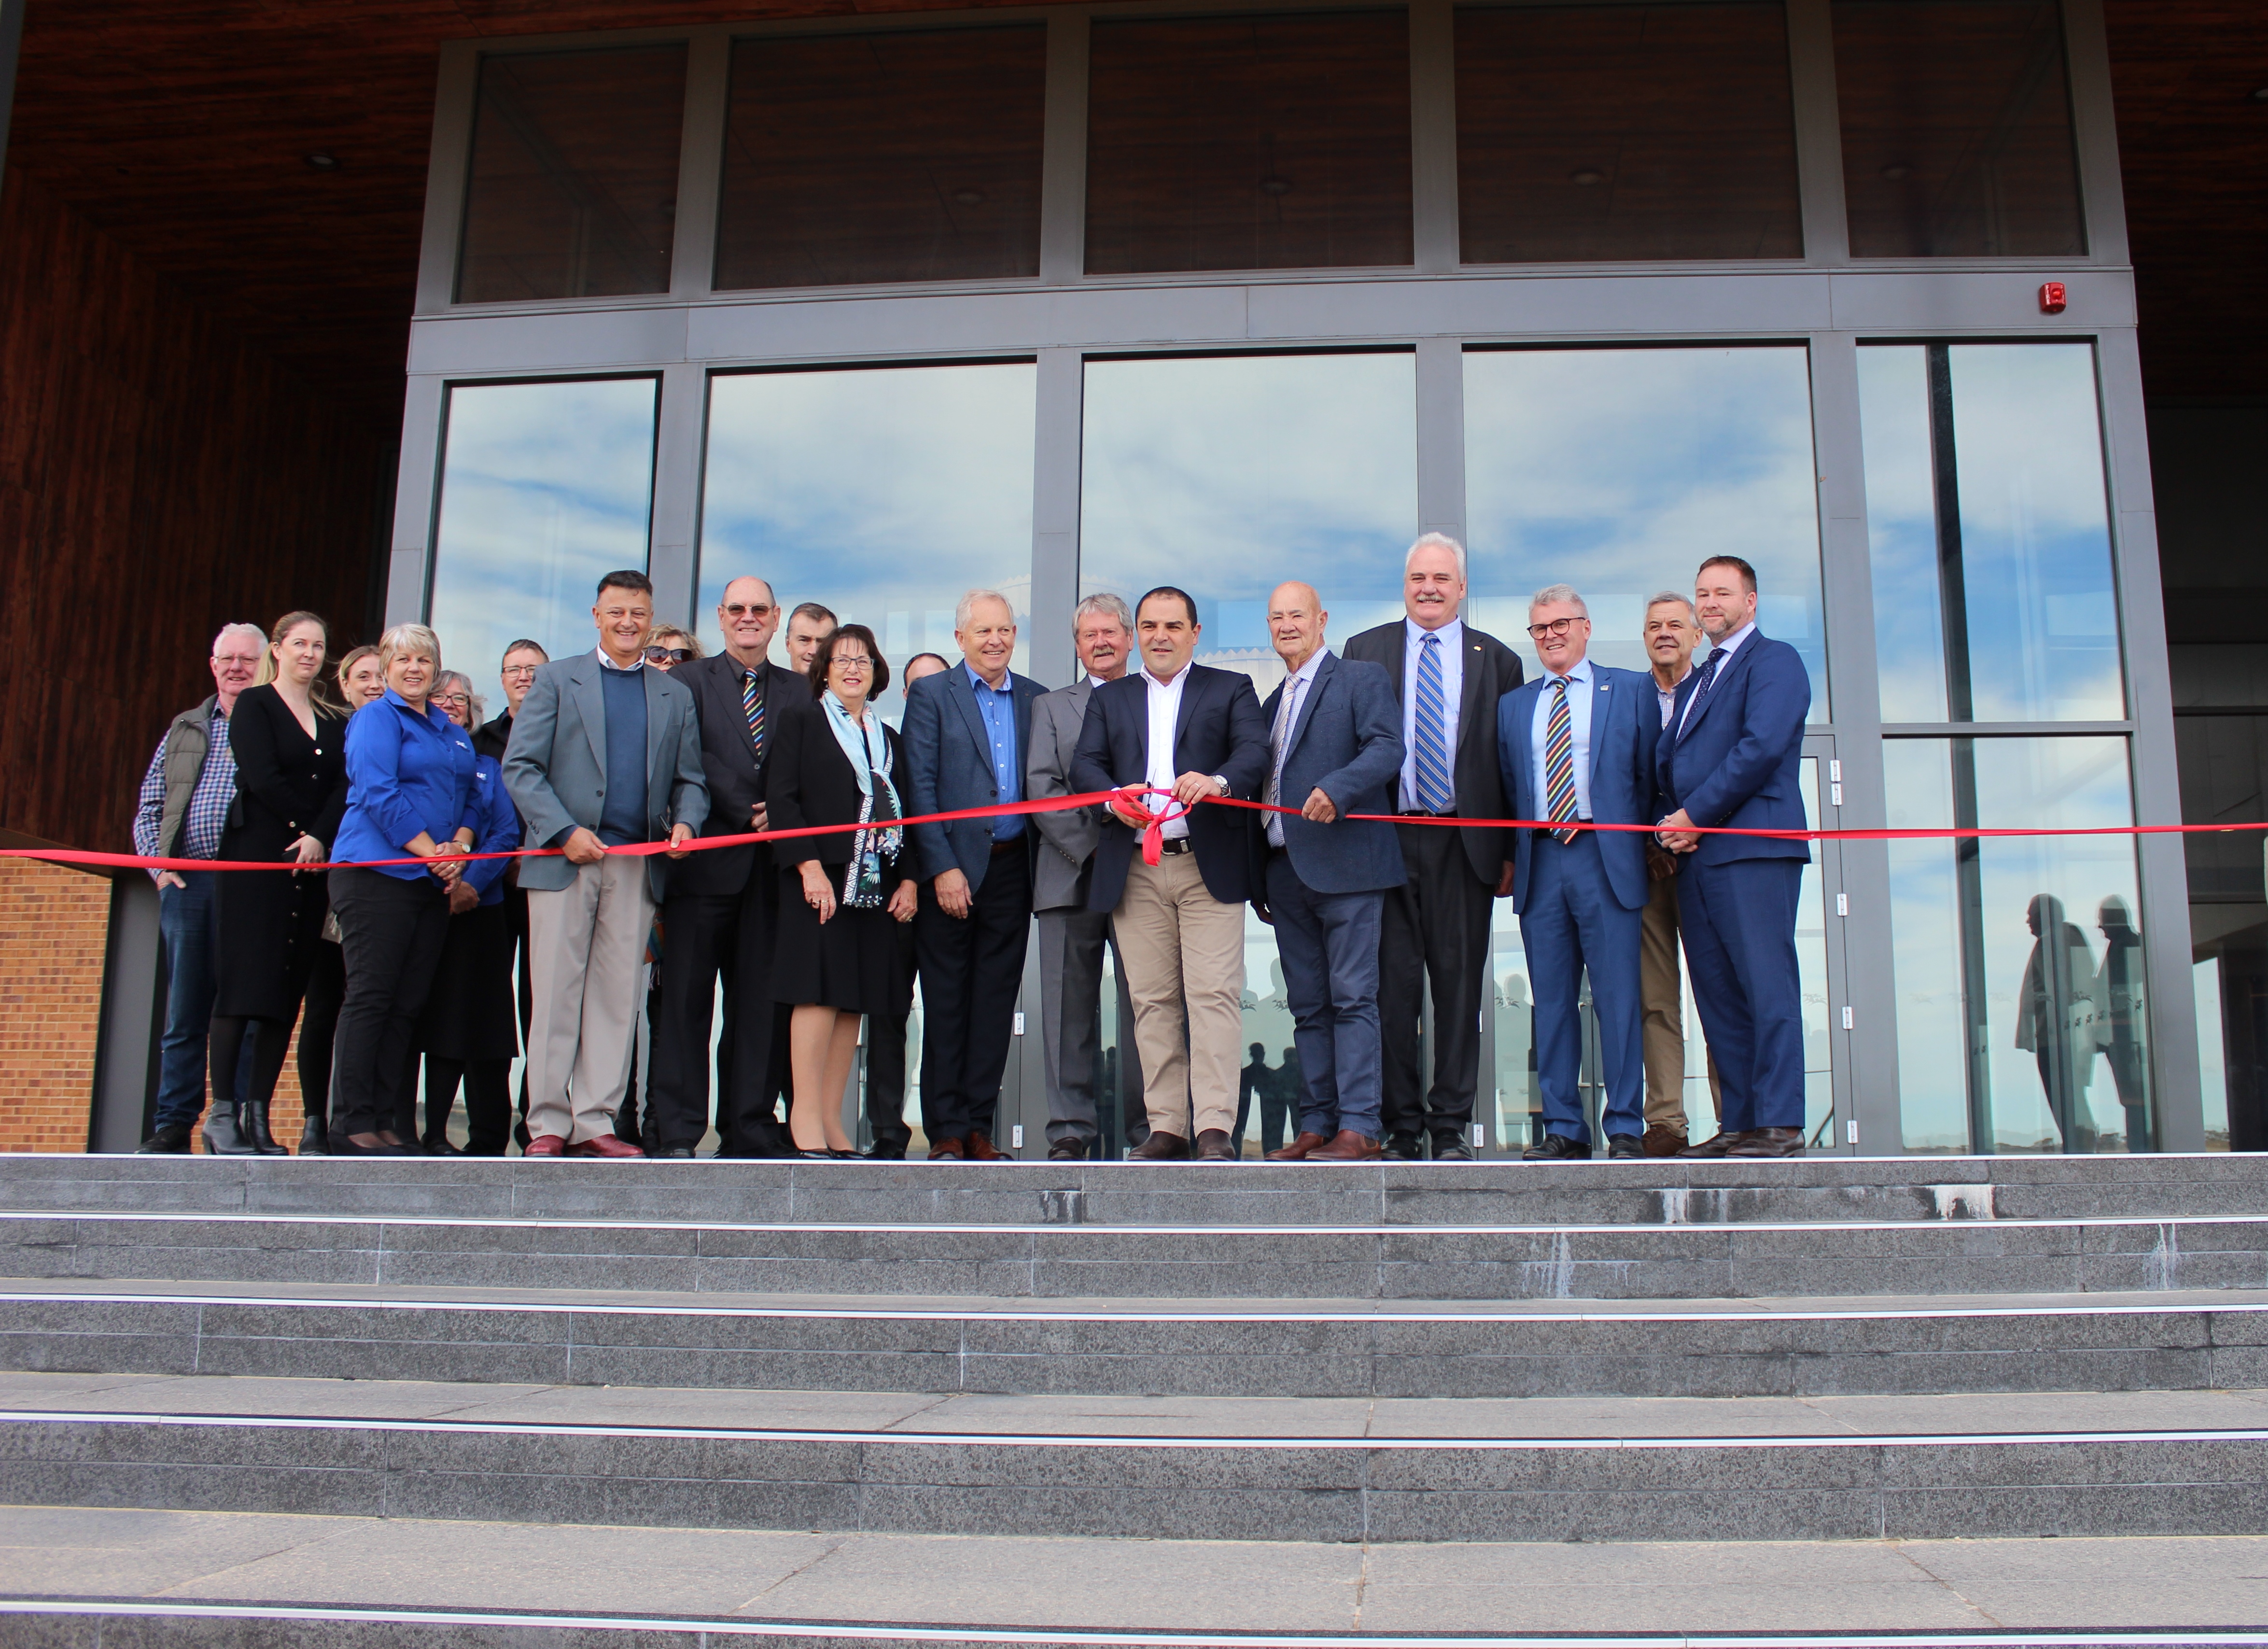 PASIN OFFICALLY OPENS THE BRIDGES FUNCTION CENTRE